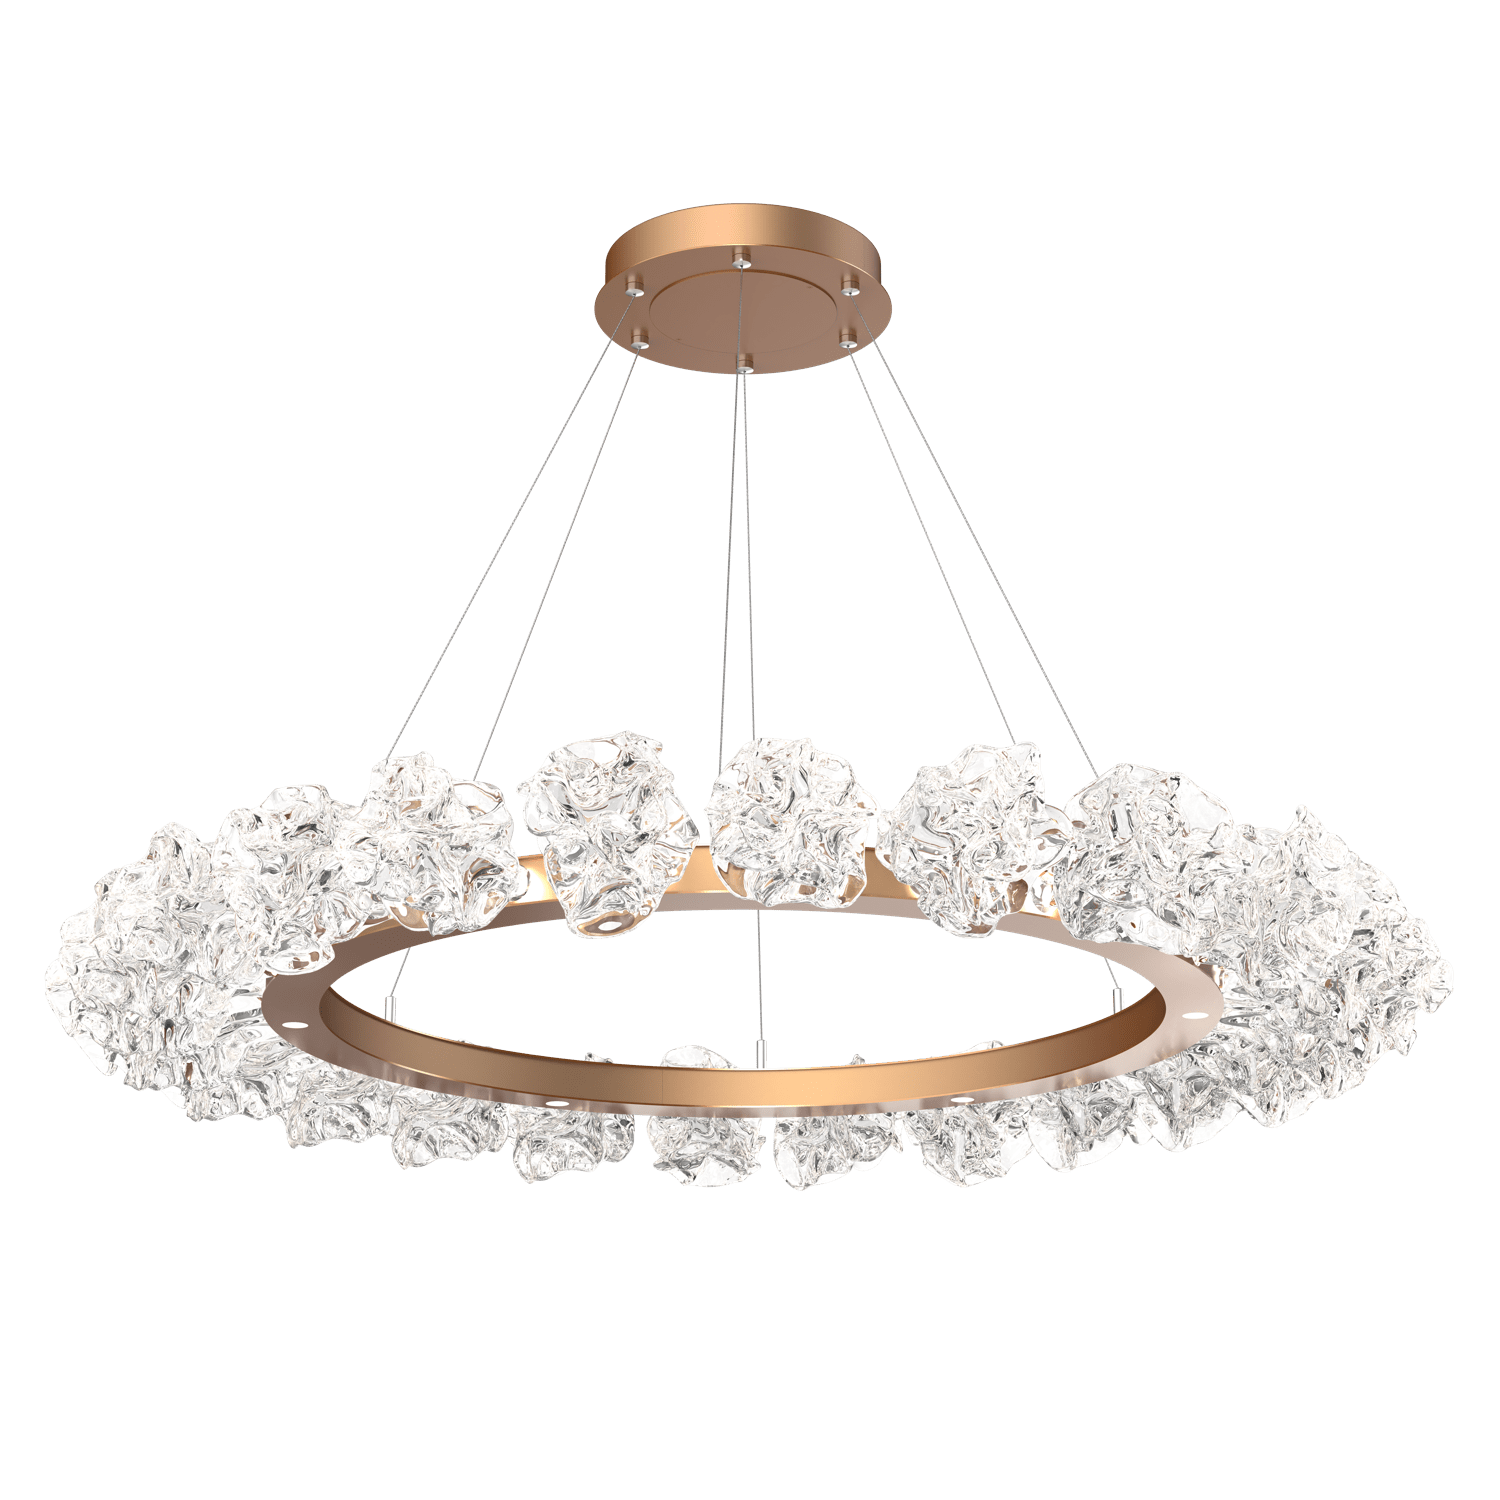 CHB0059-50-NB-Hammerton-Studio-Blossom-50-inch-radial-ring-chandelier-with-novel-brass-finish-and-clear-handblown-crystal-glass-shades-and-LED-lamping